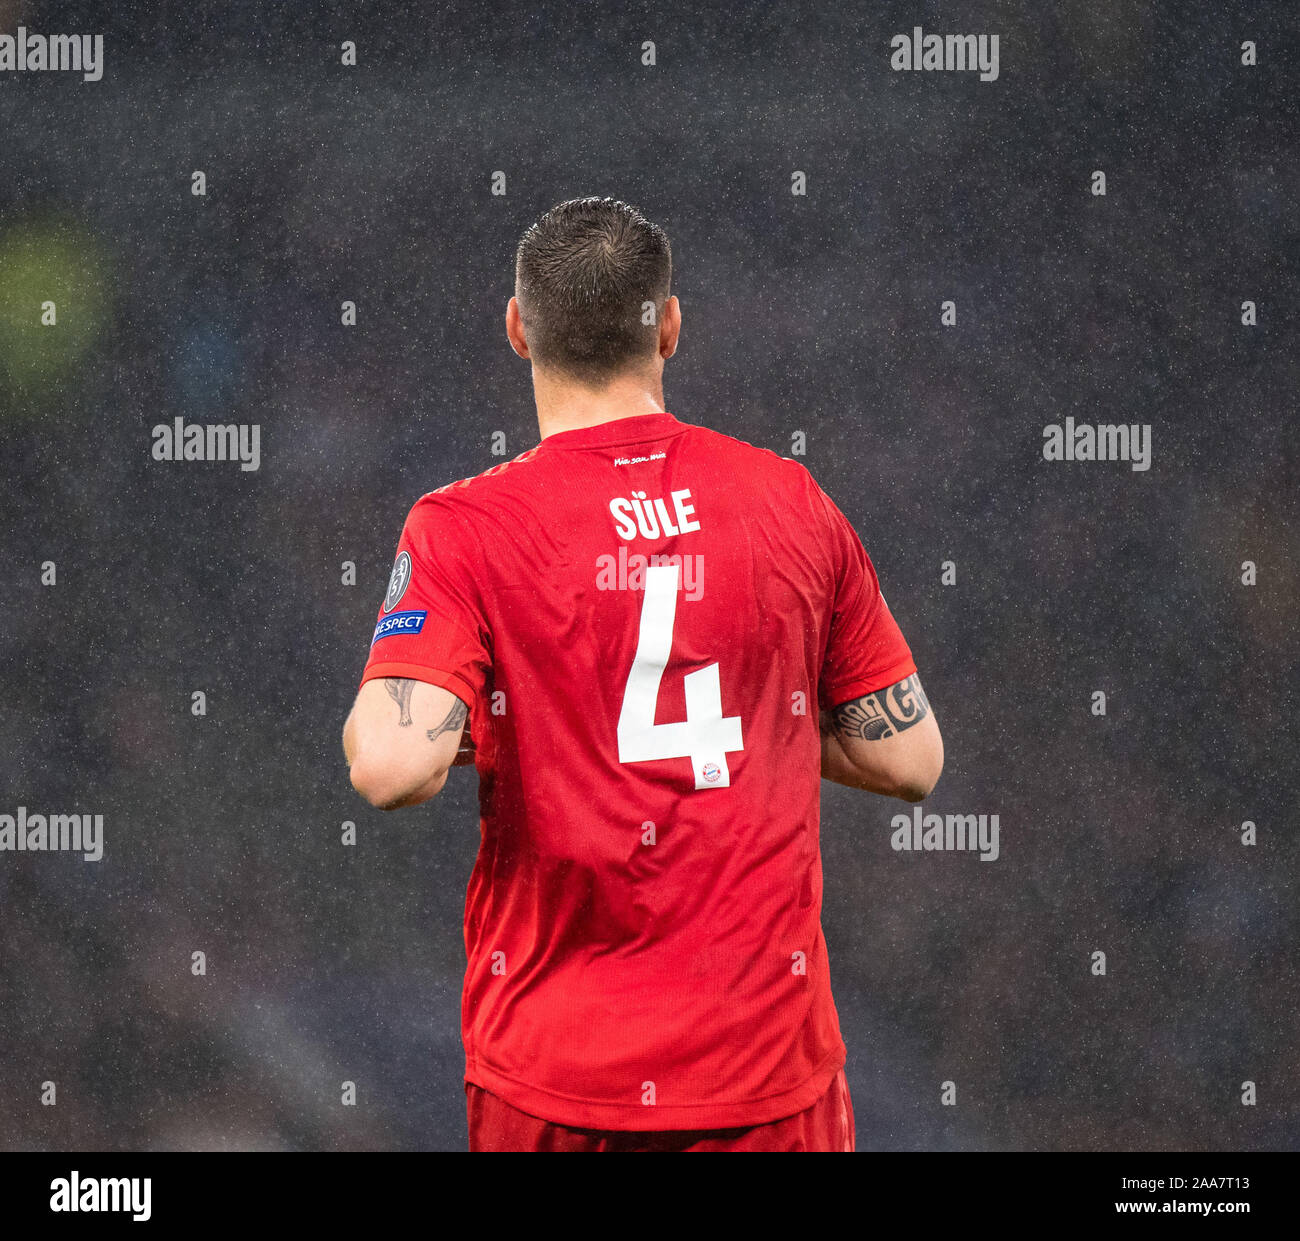 LONDON, ENGLAND - OCTOBER 01: Niklas Sule of Bayern Muenchen during the UEFA Champions League group B match between Tottenham Hotspur and Bayern Muenc Stock Photo